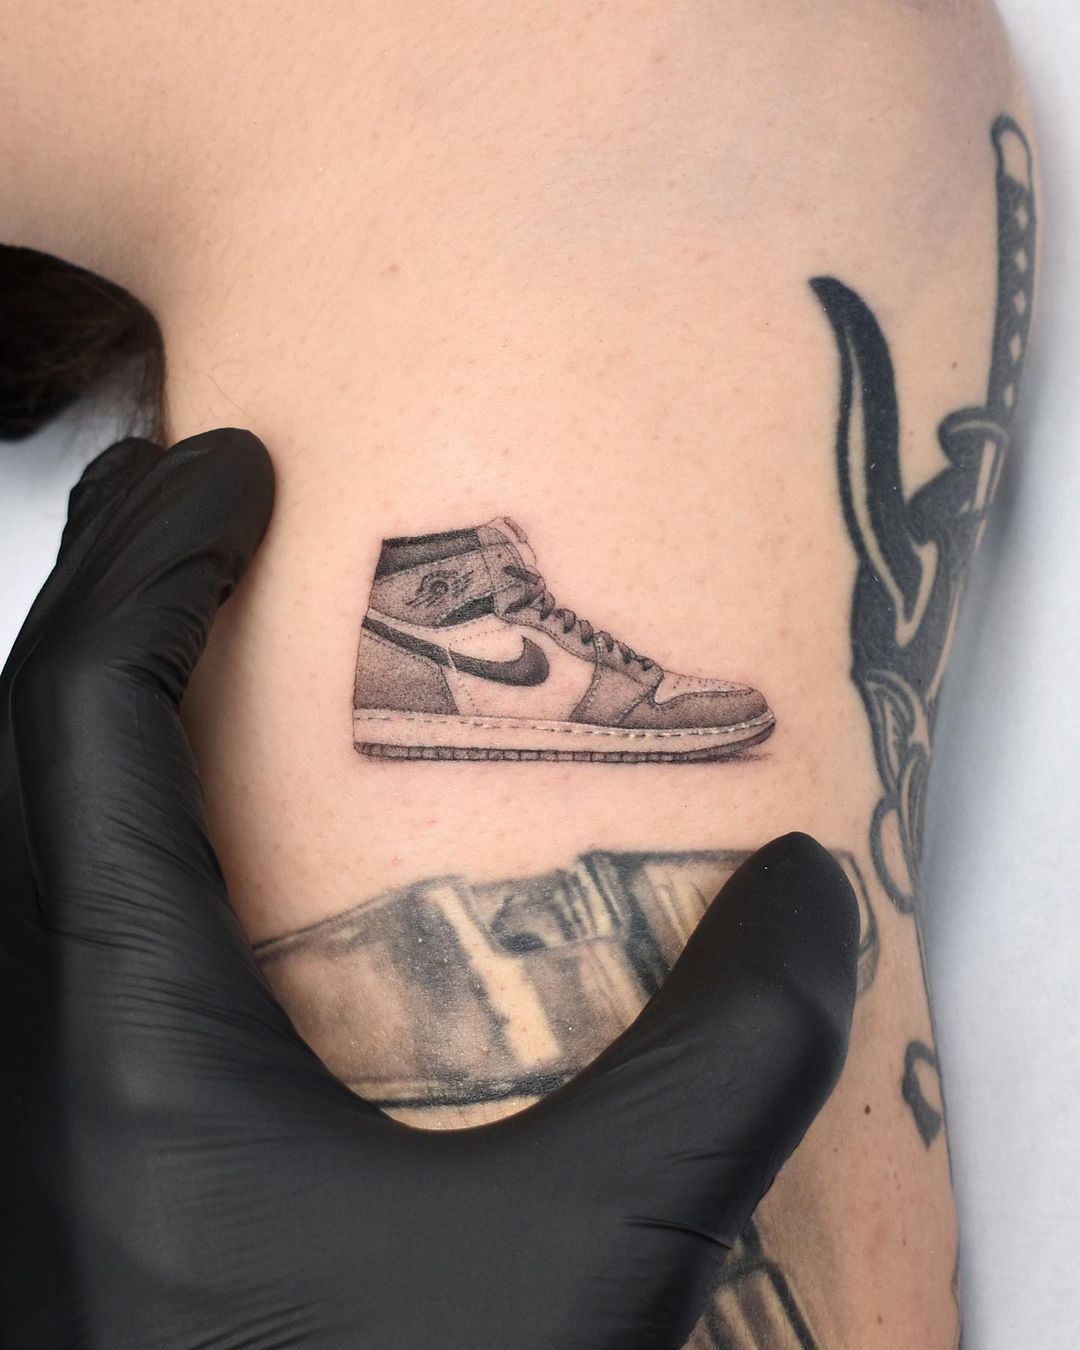 Man Gets Favourite Nike Shoes Tattooed on Feet as He Was Tired of Paying  for Them  News18